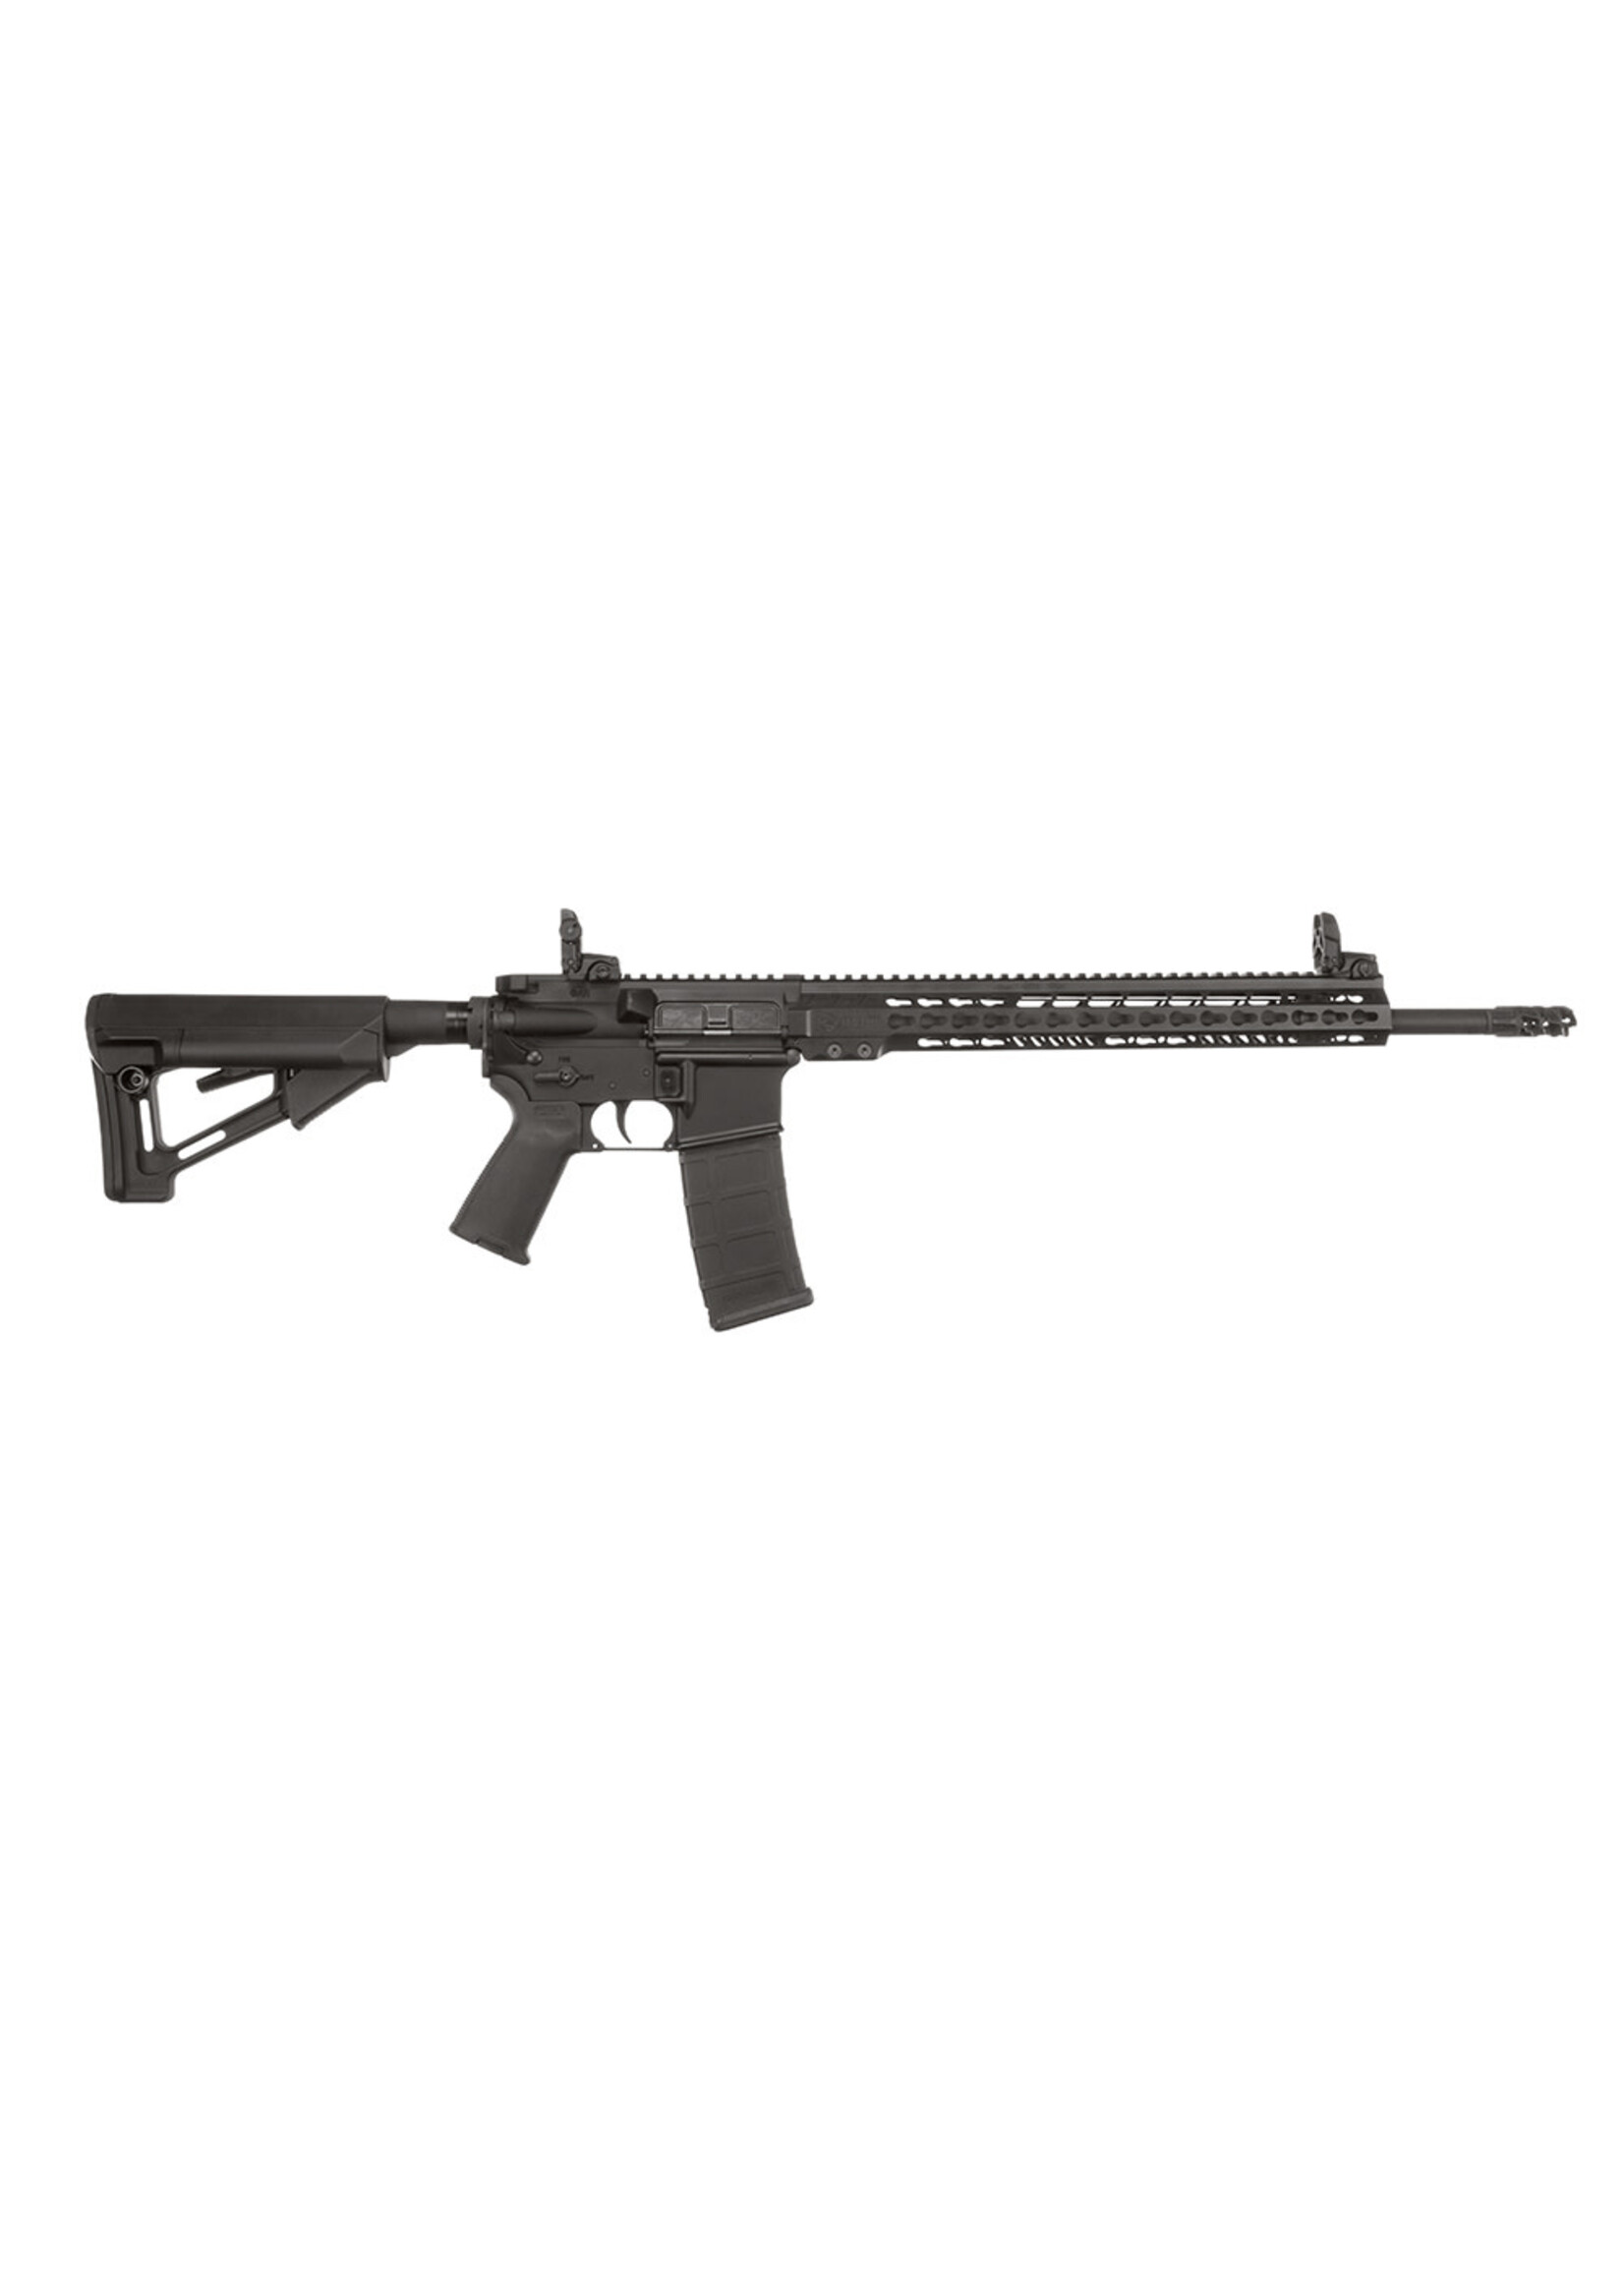 ArmaLite ArmaLite M15TAC18 M-15 Tactical 223 Wylde 30+1 18" Barrel, Black Hard Coat Anodized Receiver, Adjustable Magpul STR Collapsible Stock, Magpul MBUS Front & Rear Sights, Flash Hider, Optics Ready